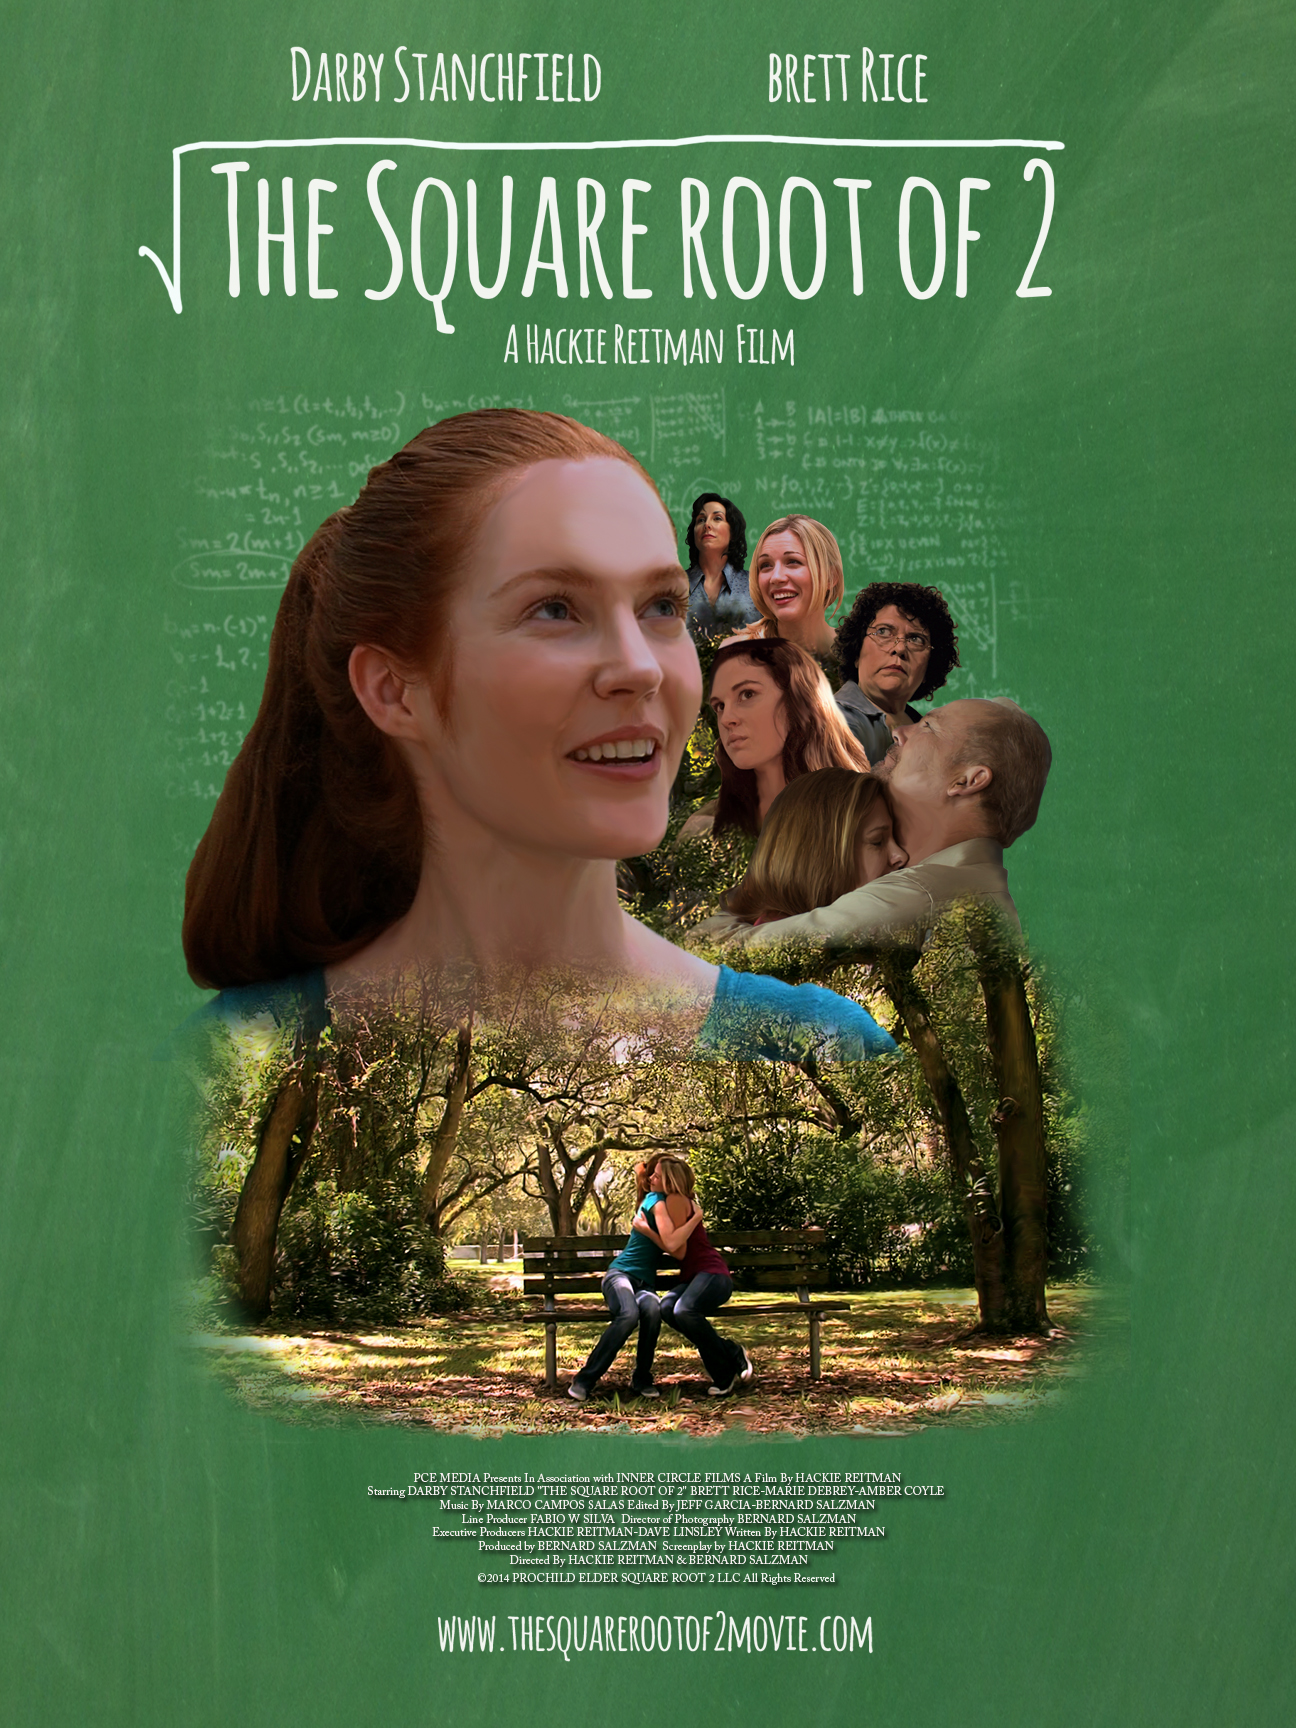 The Square Root of 2 Film Poster